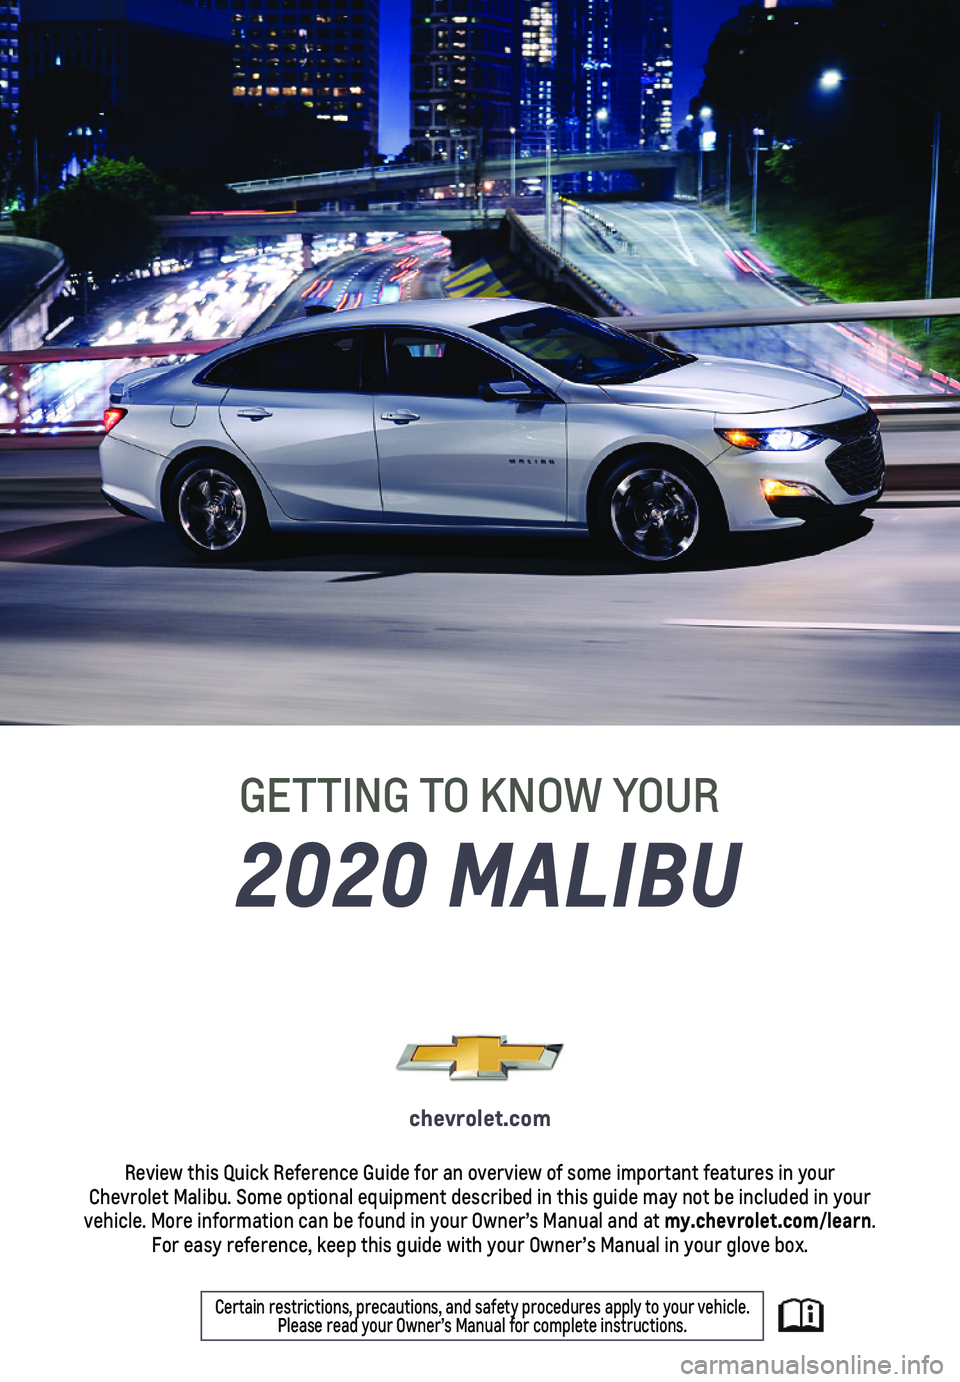 CHEVROLET MALIBU 2020  Get To Know Guide 1
2020 MALIBU
GETTING TO KNOW YOUR
chevrolet.com
Review this Quick Reference Guide for an overview of some important feat\
ures in your  Chevrolet Malibu. Some optional equipment described in this gui